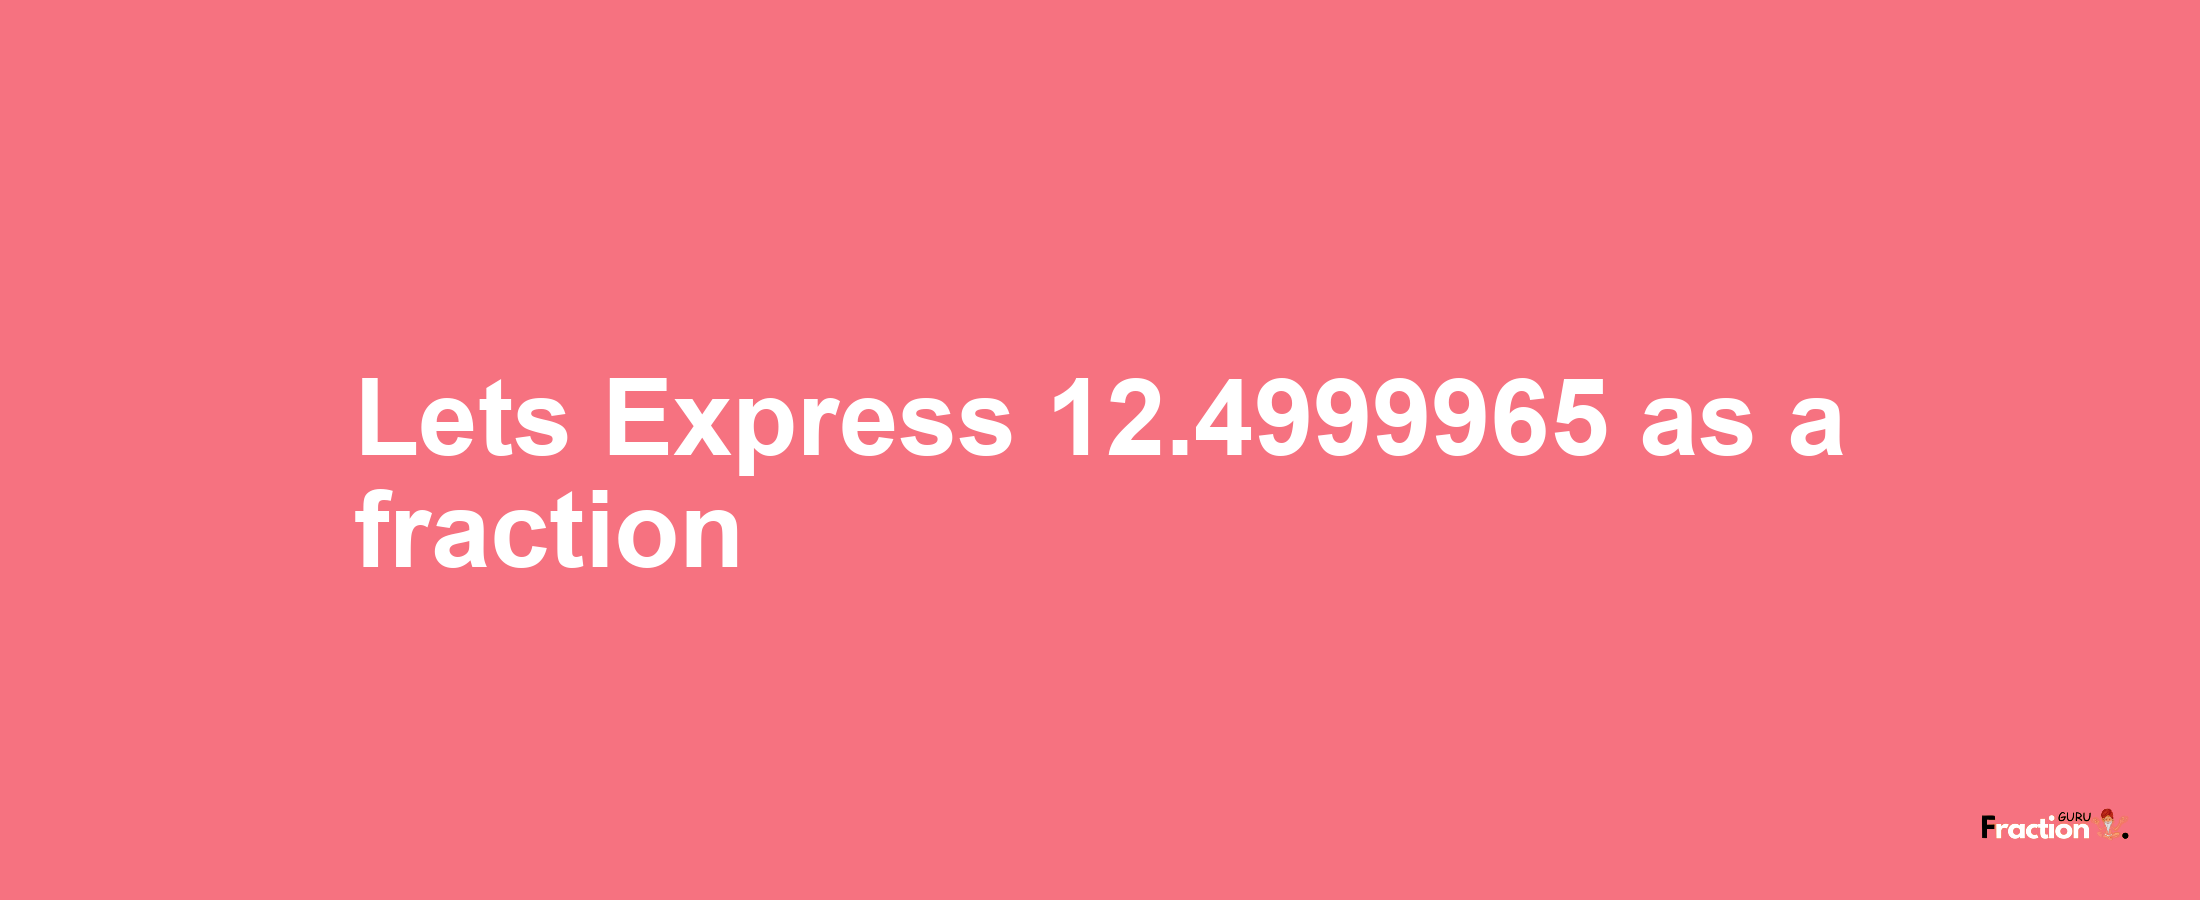 Lets Express 12.4999965 as afraction